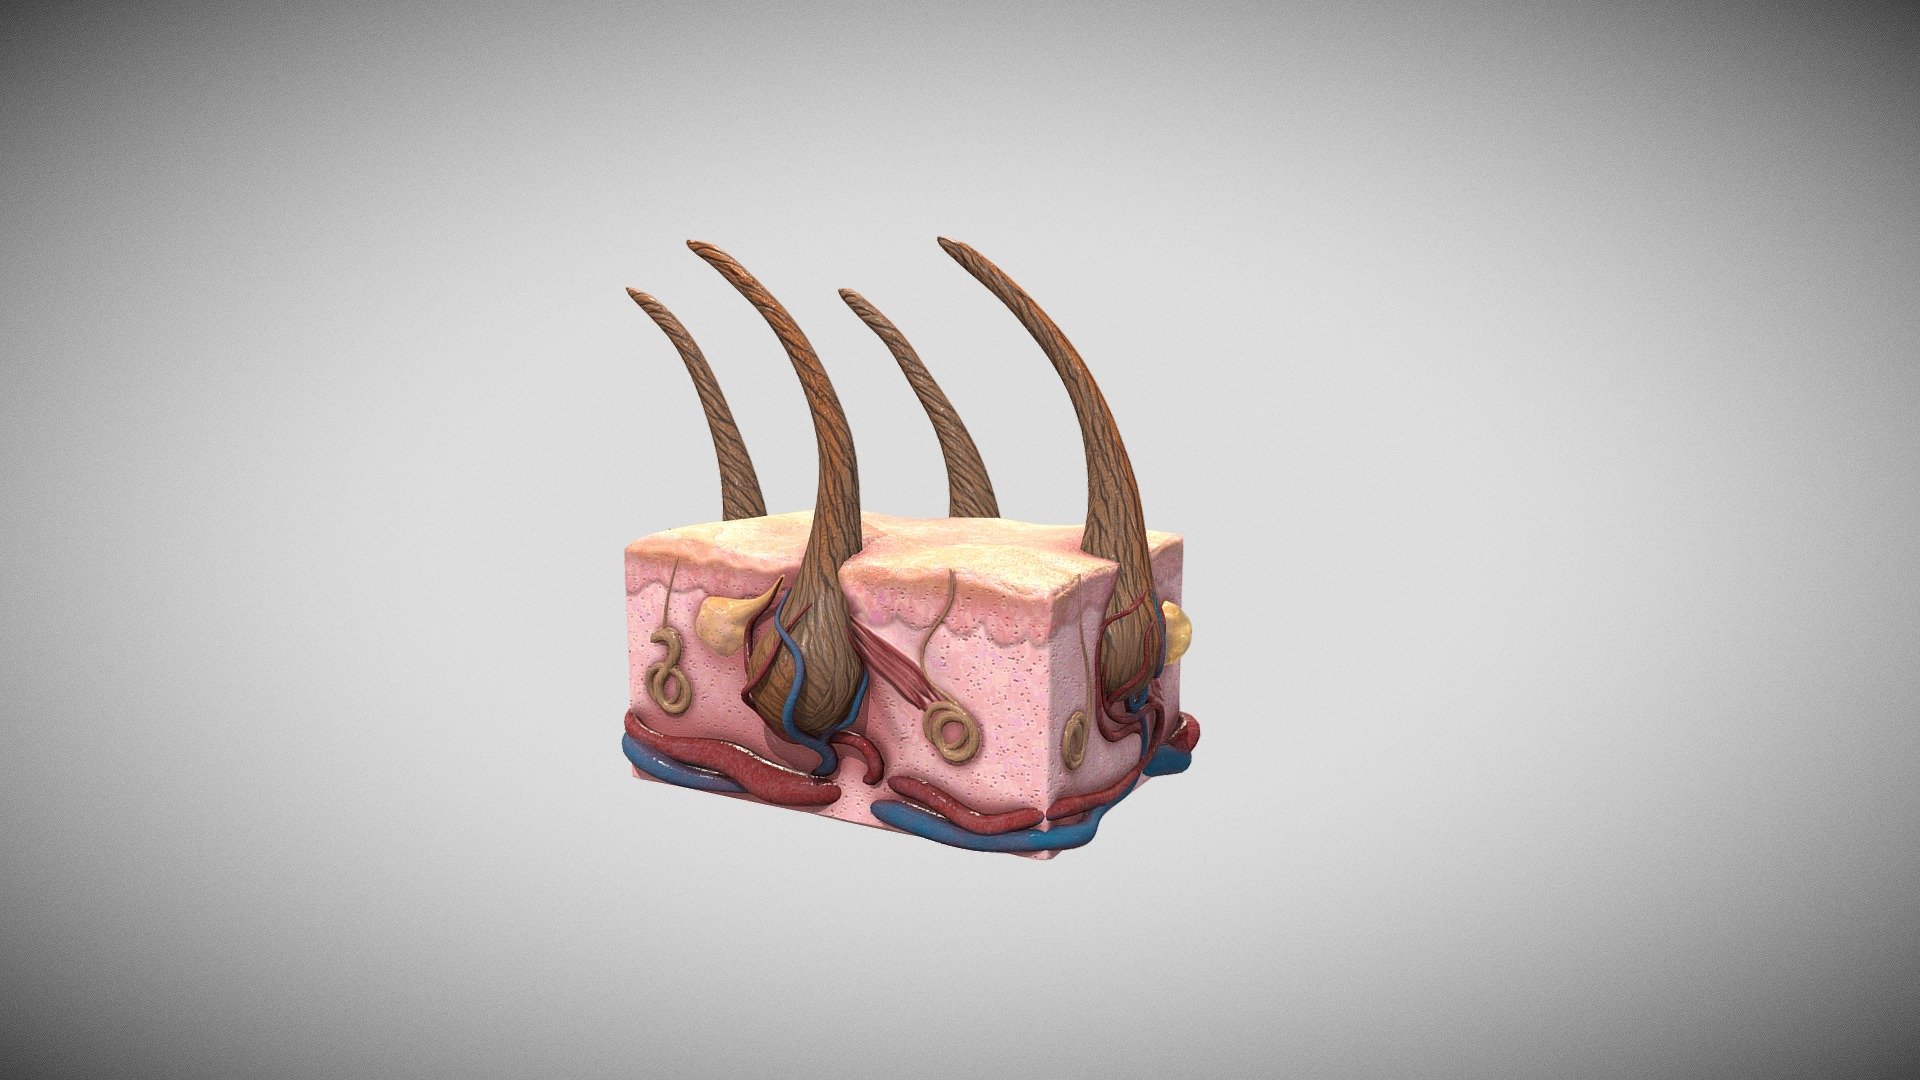 anatomical model of the structure of hair and skin.
PBR, LOWPOLY, SIZE - 4096*4096, tiff
the file contains besides PBR textures - skin and hair Low-poly 3D model - Buy Royalty Free 3D model by spartankaKst 3d model